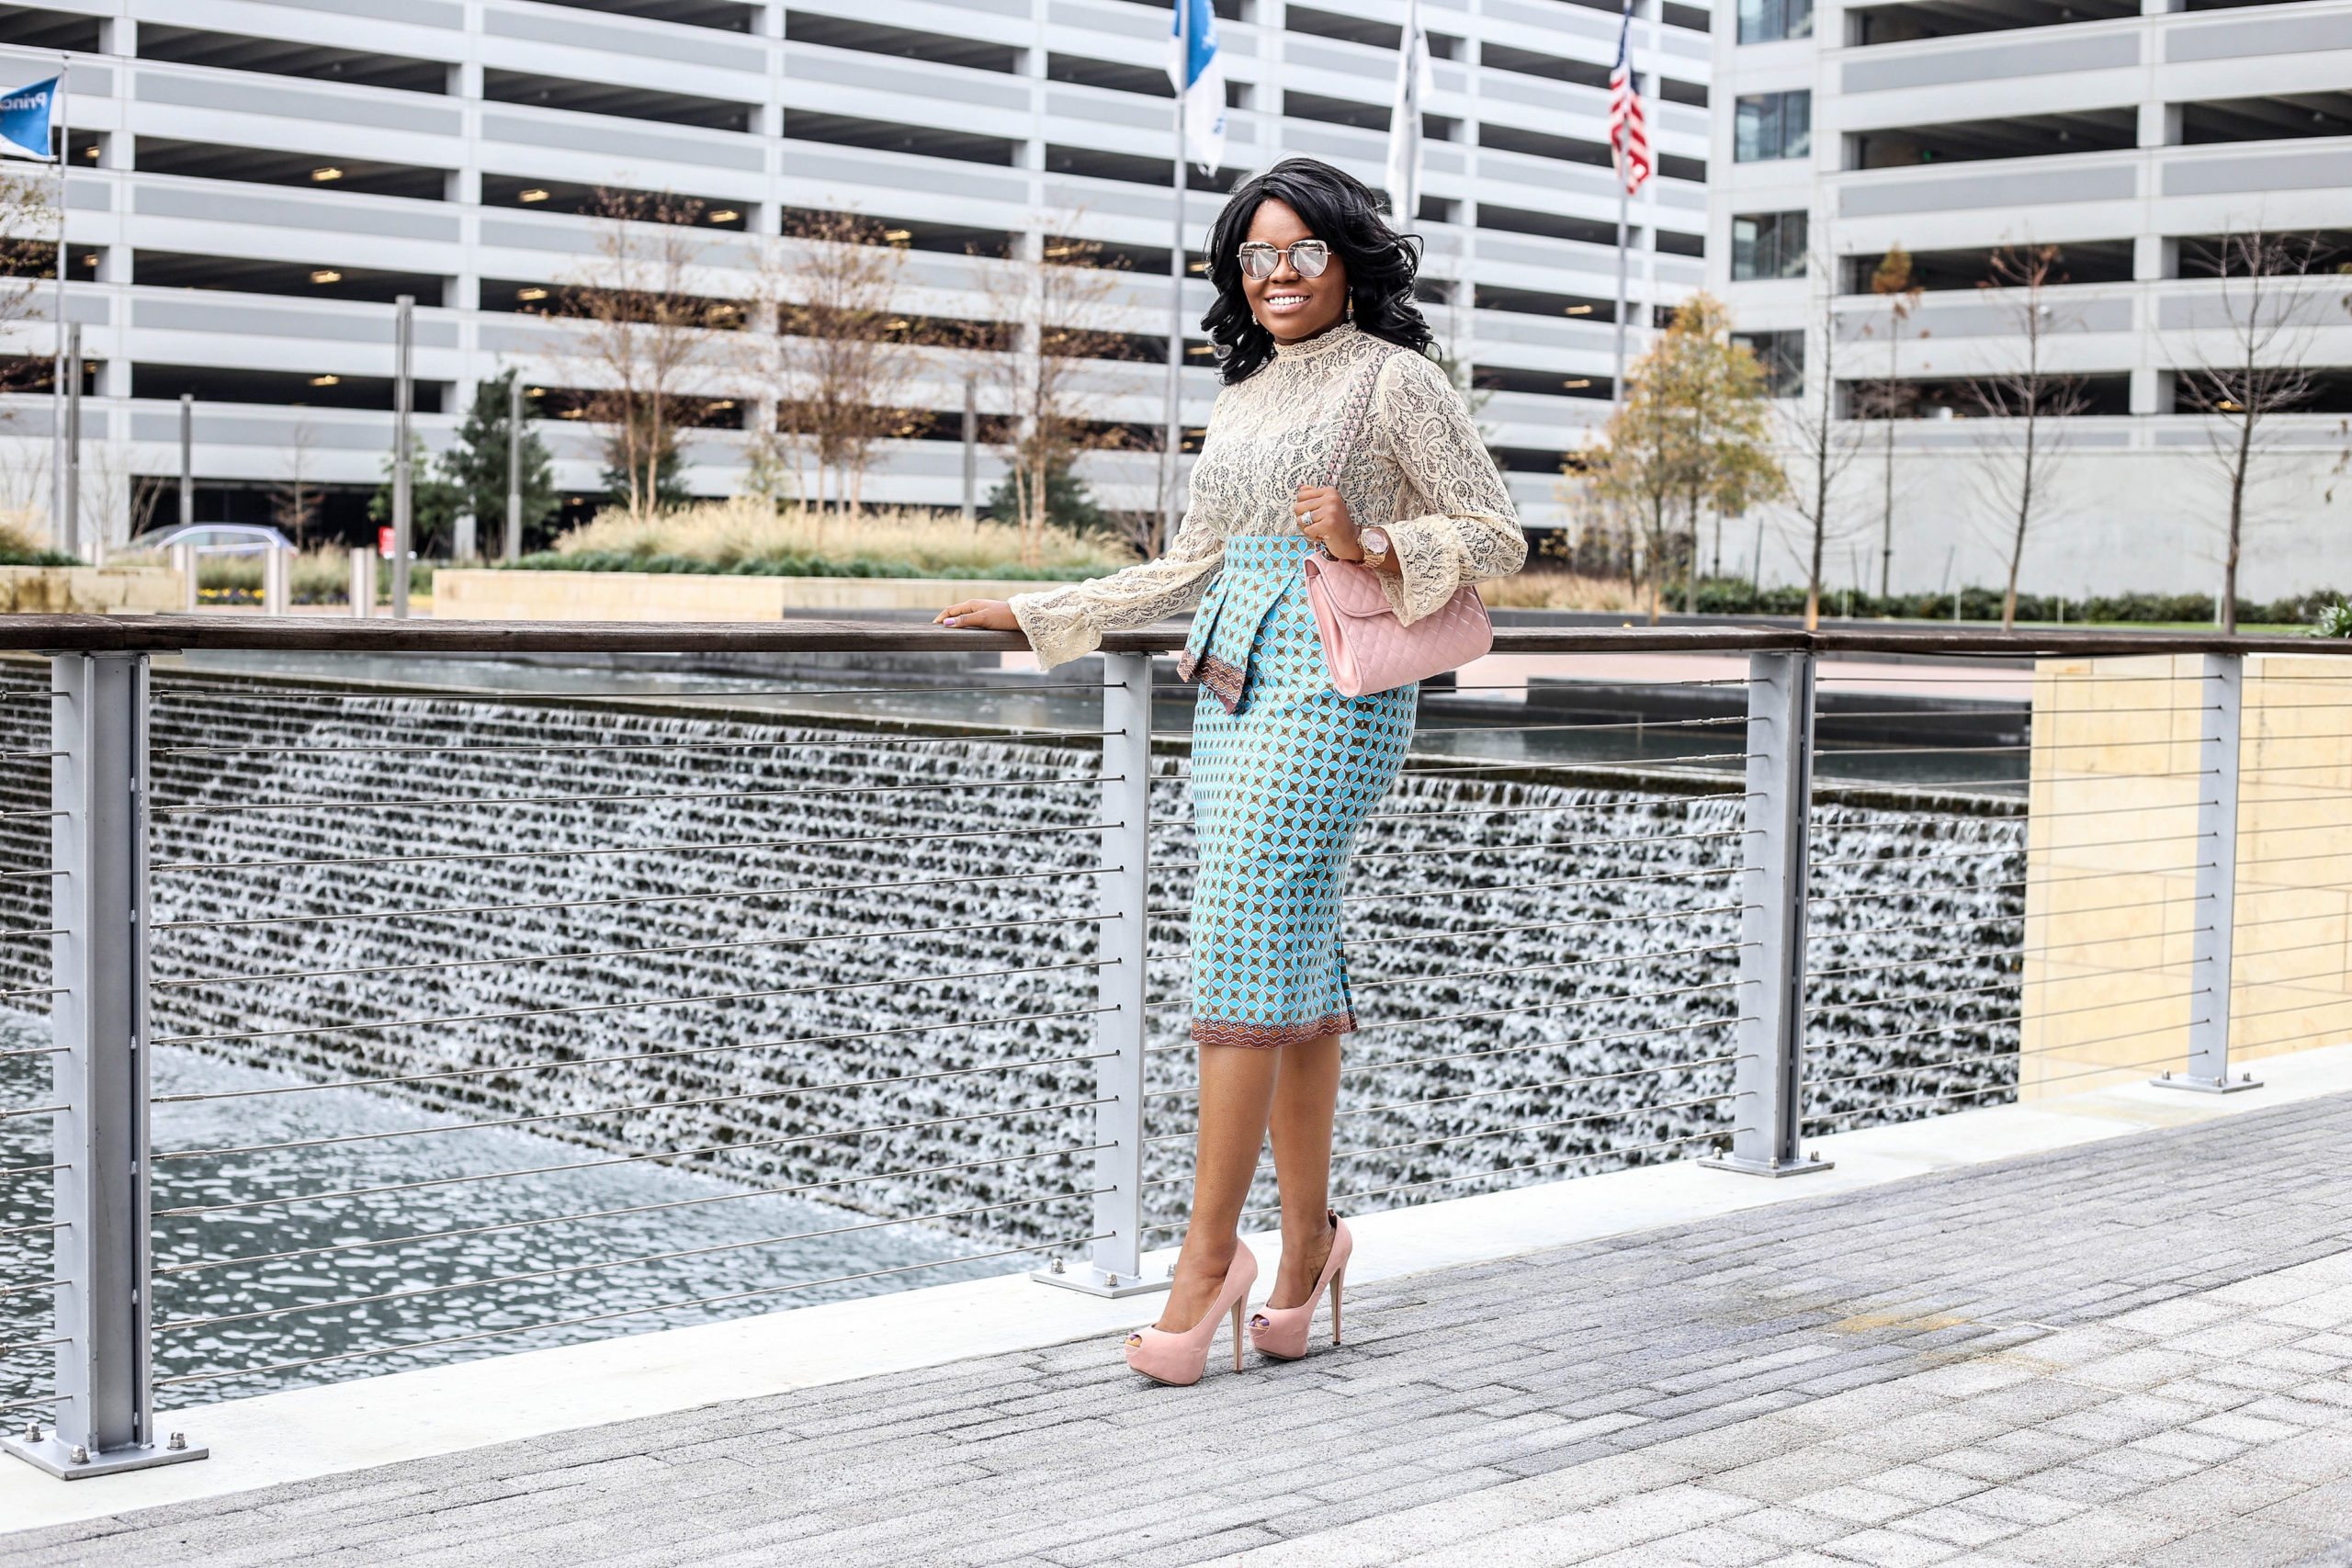 Brick and Lace - 10 Things to Learn from Michelle Obama Nordstrom Nude Lace Top Blue Rina 3reecs Skirt Breckelles Blush Pink Heels Rebecca Minkoff Handbag Agaci Sunglasses Michael Kors Wristwatch